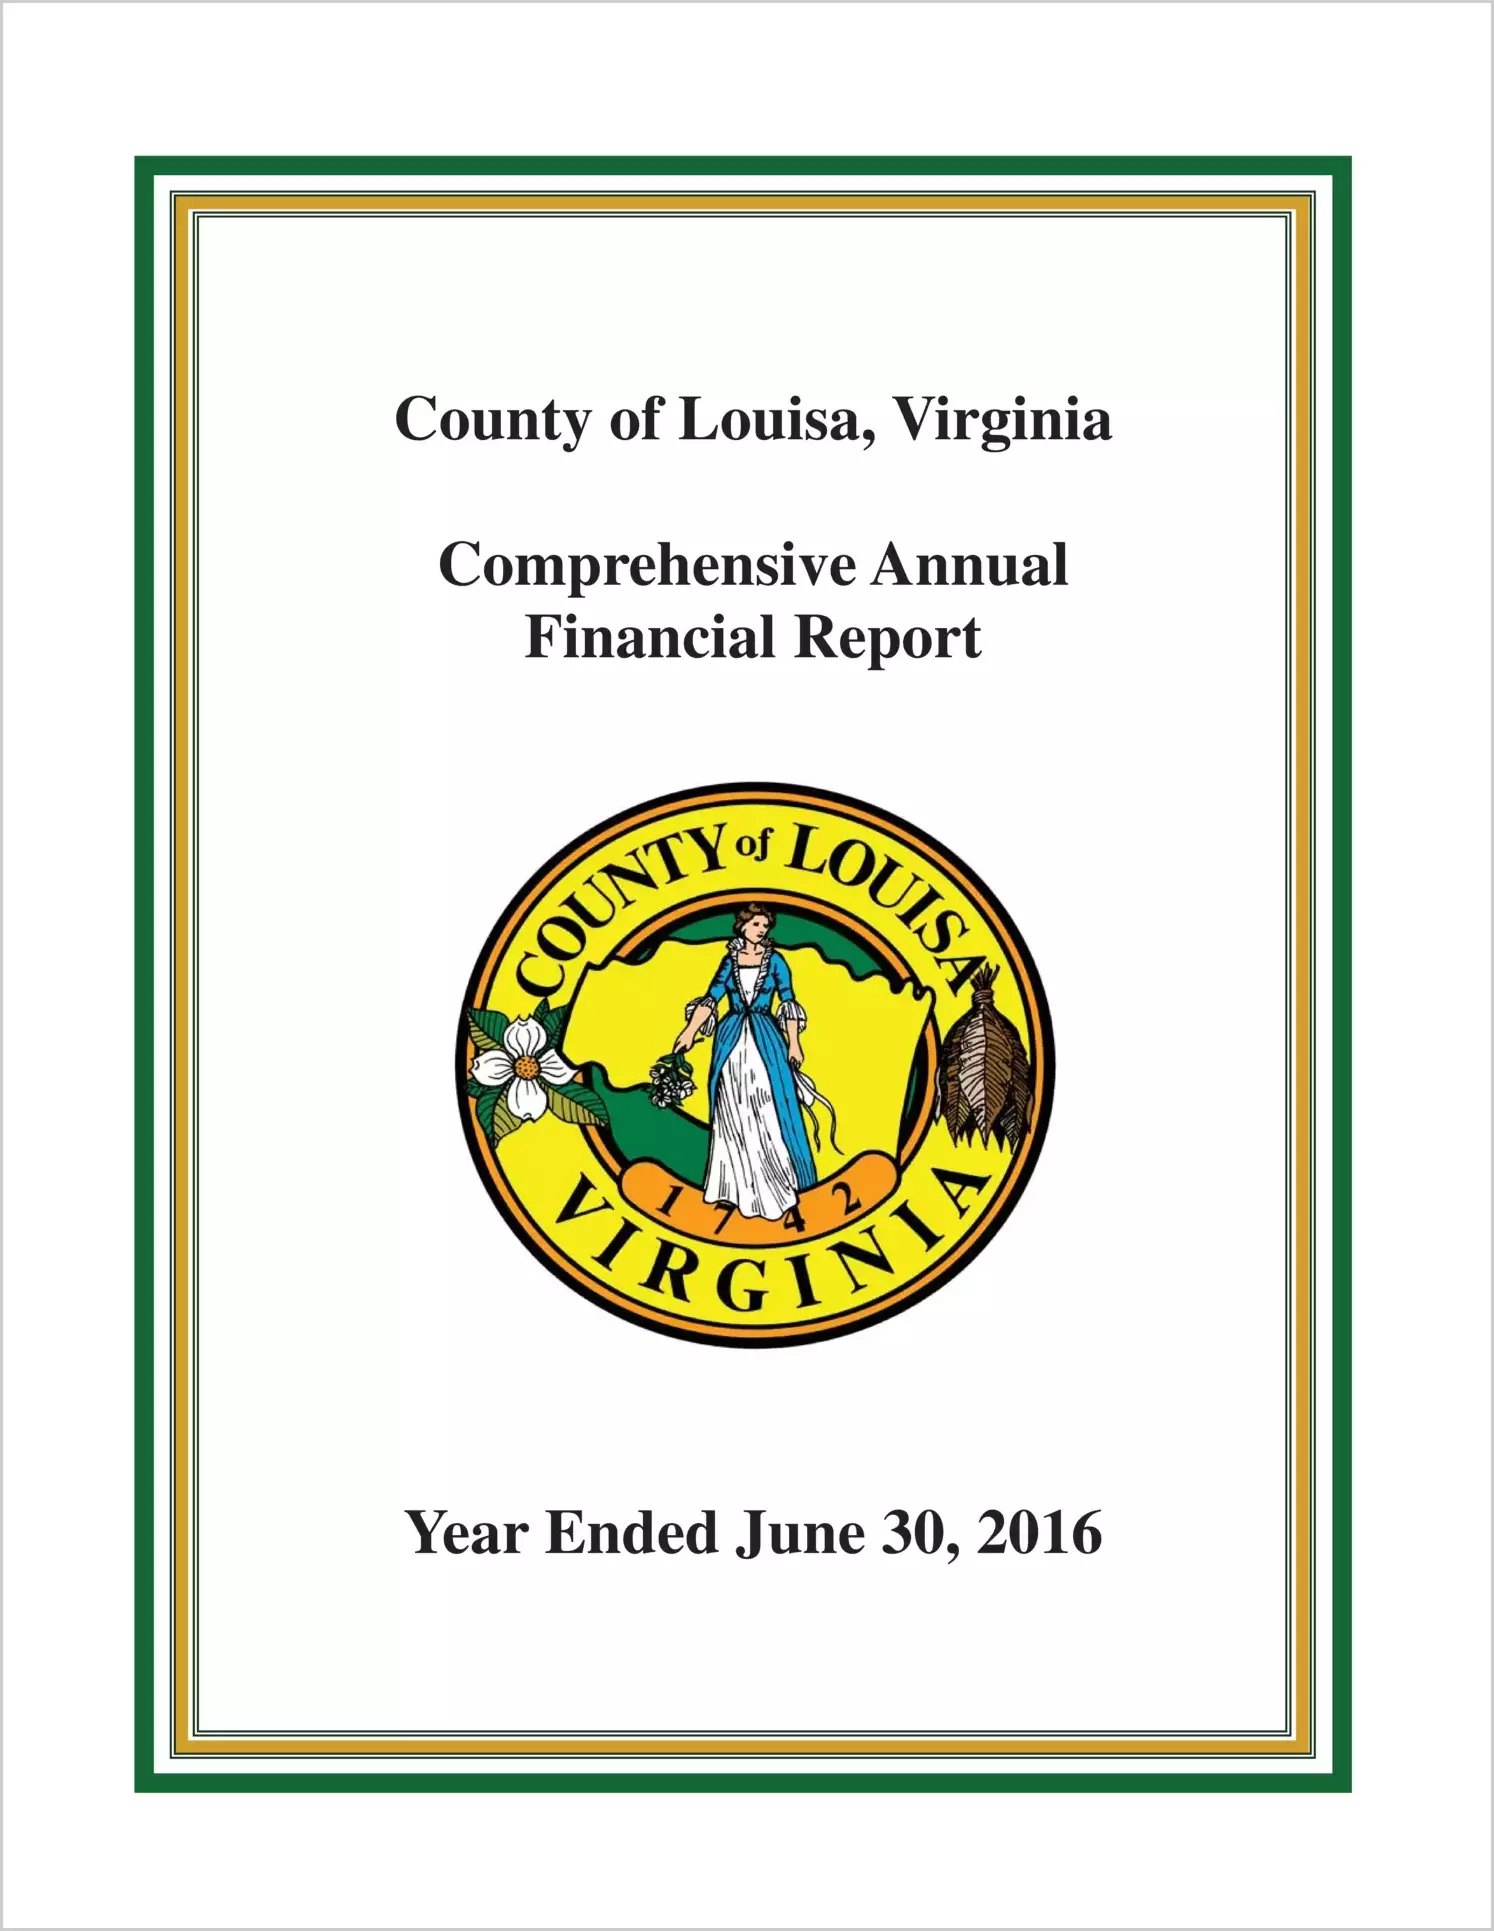 2016 Annual Financial Report for County of Louisa